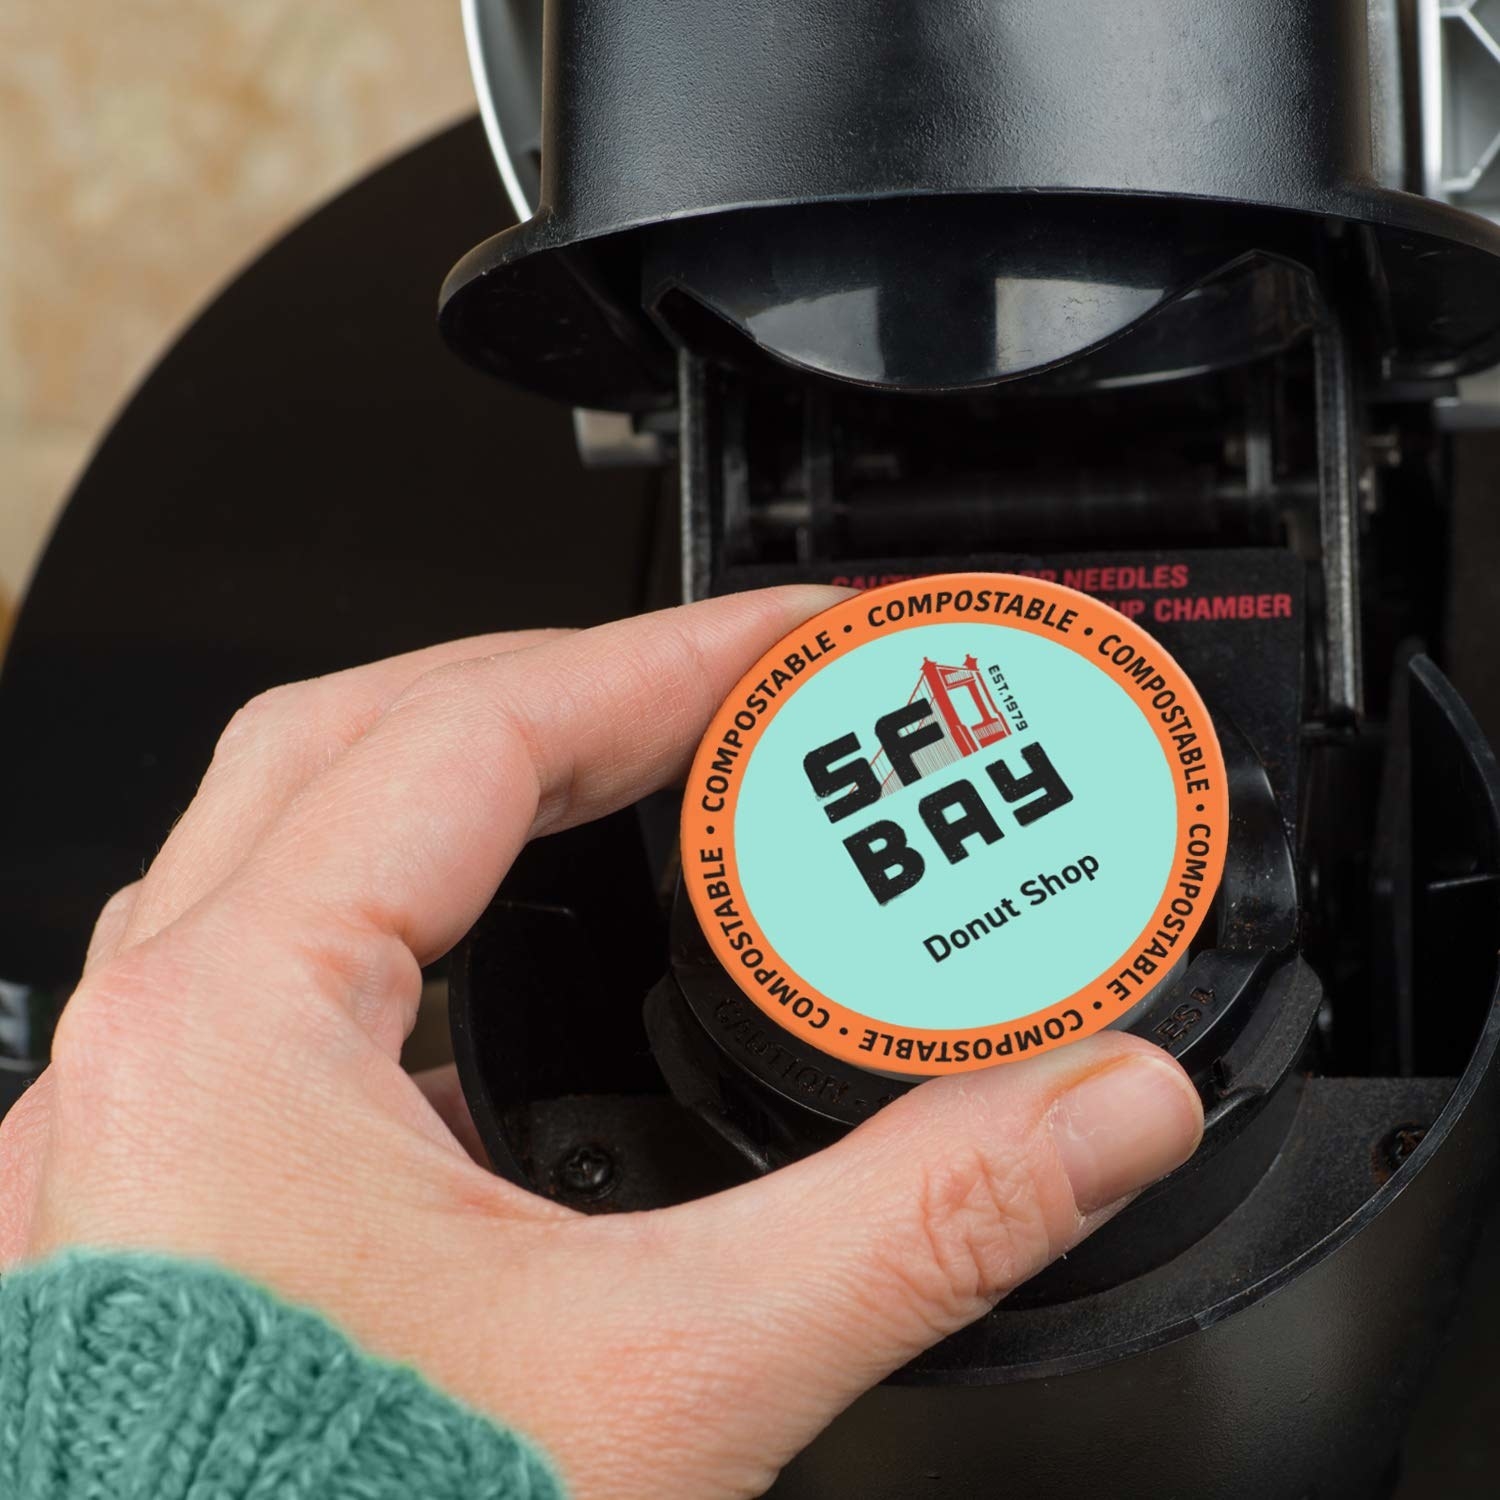 Hand holds compostable coffee pod that says &quot;SF Bay Donut Shop&quot; on the front and puts it inside Keurig-like coffee machine